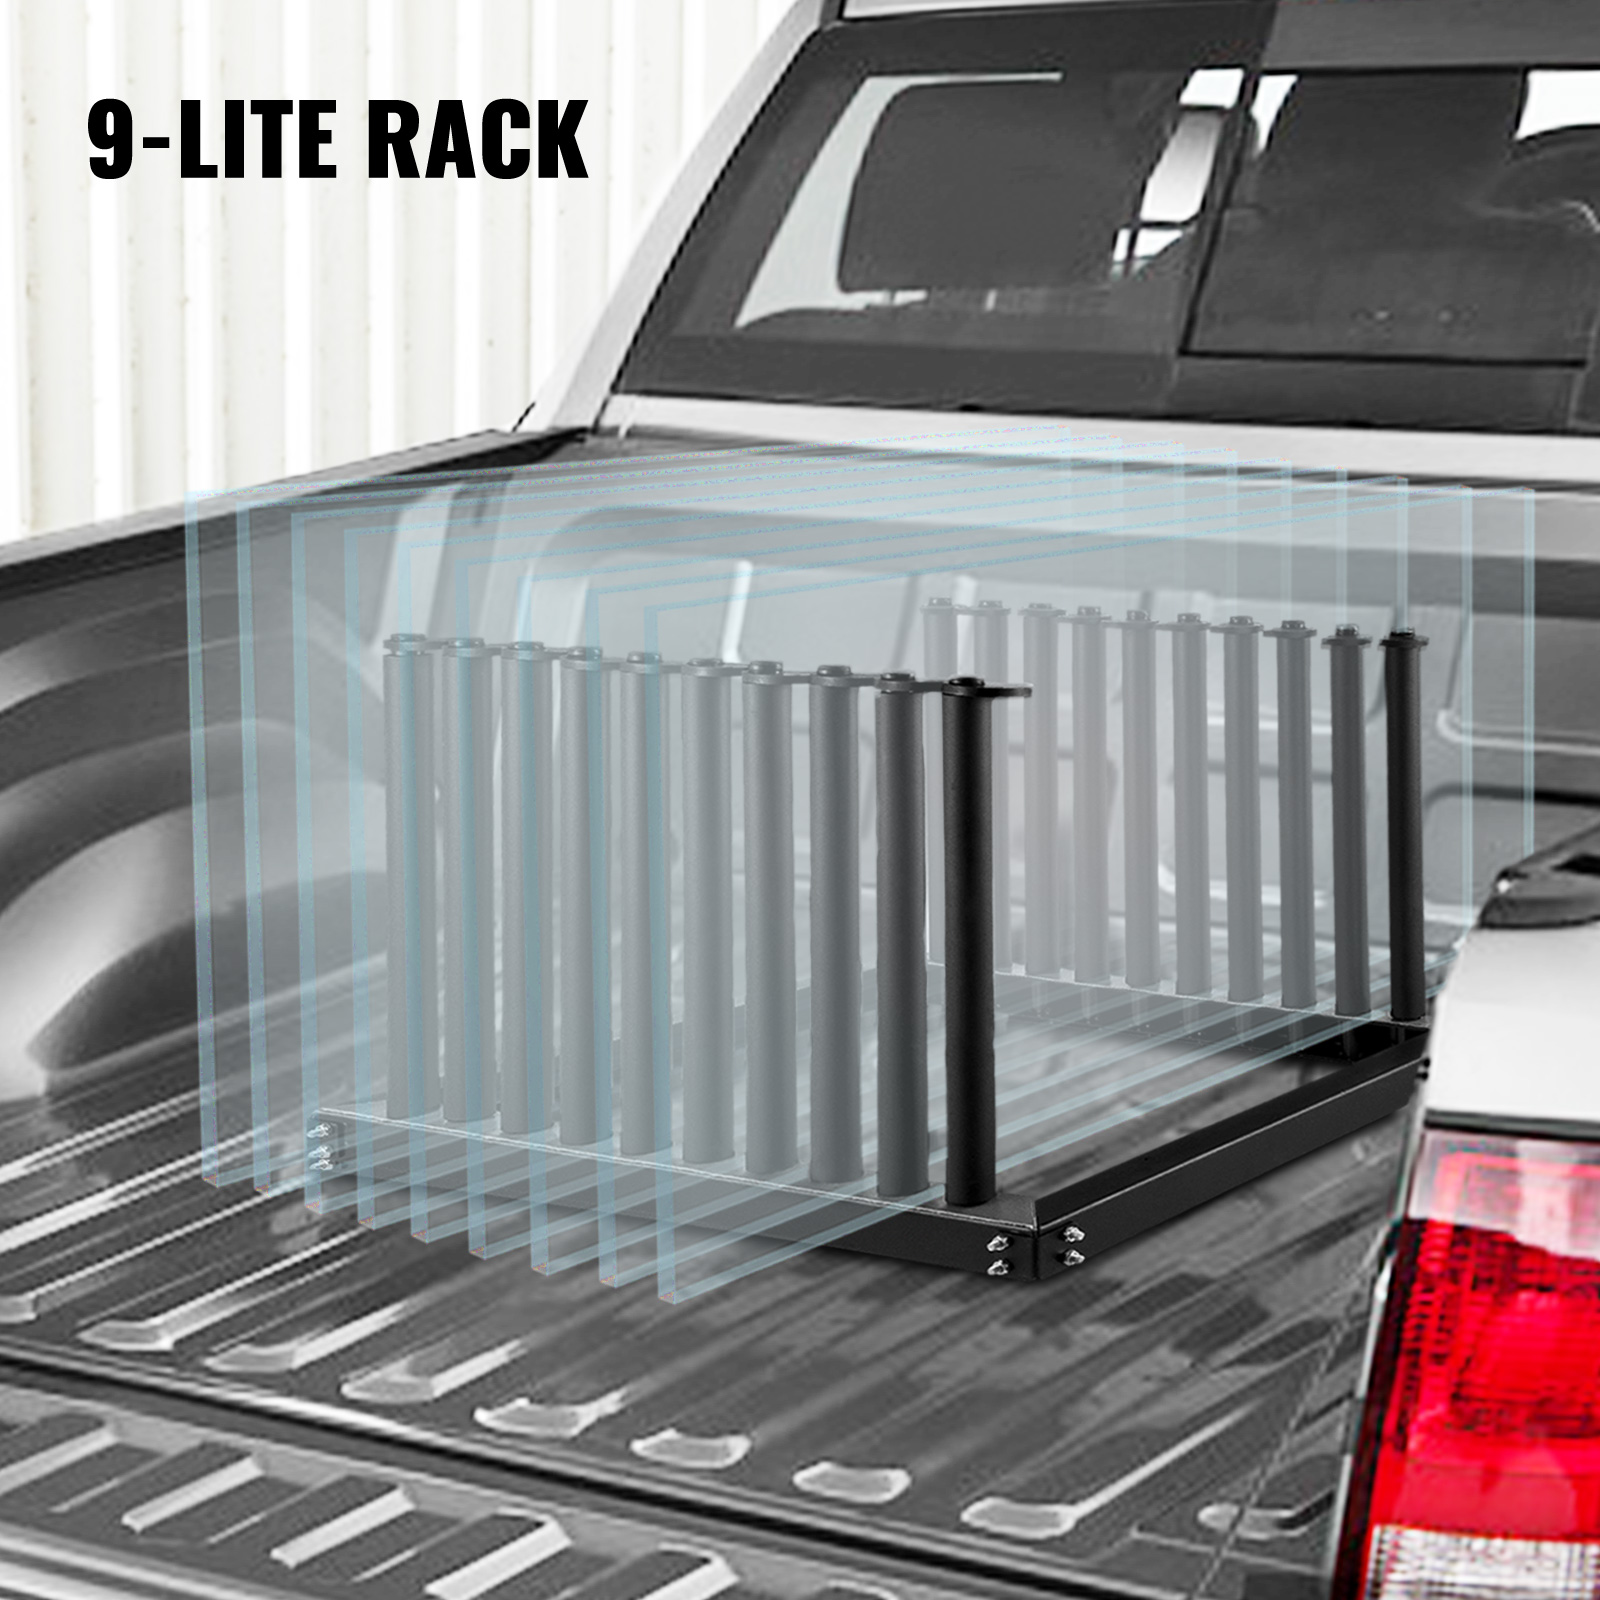 20 Pieces of 9 Lite or 5 Lite Foam Sleeve for Windshield Rack 